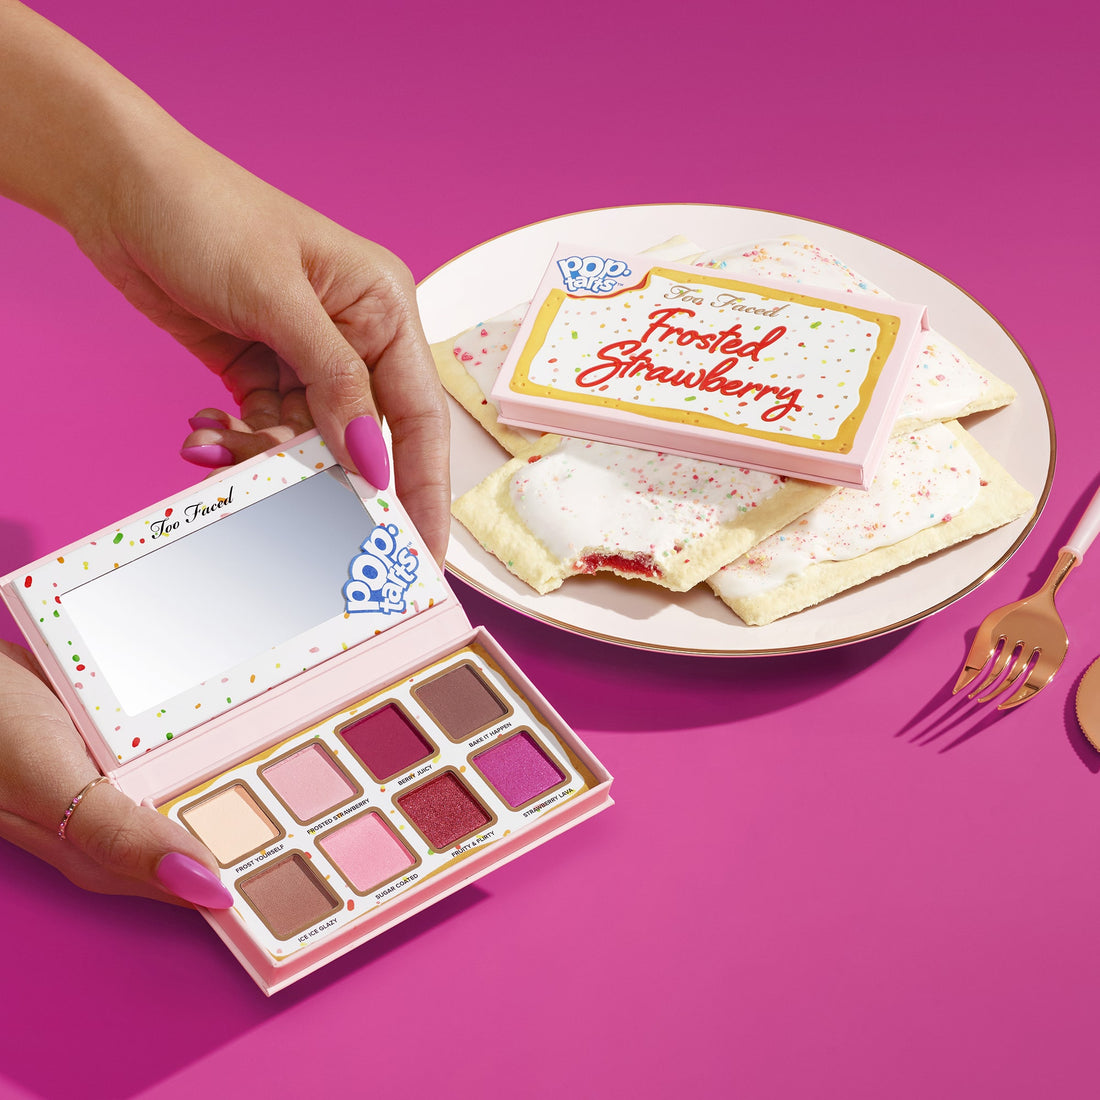 Frosed Strawberry Eyeshadow Palette - Too Faced.